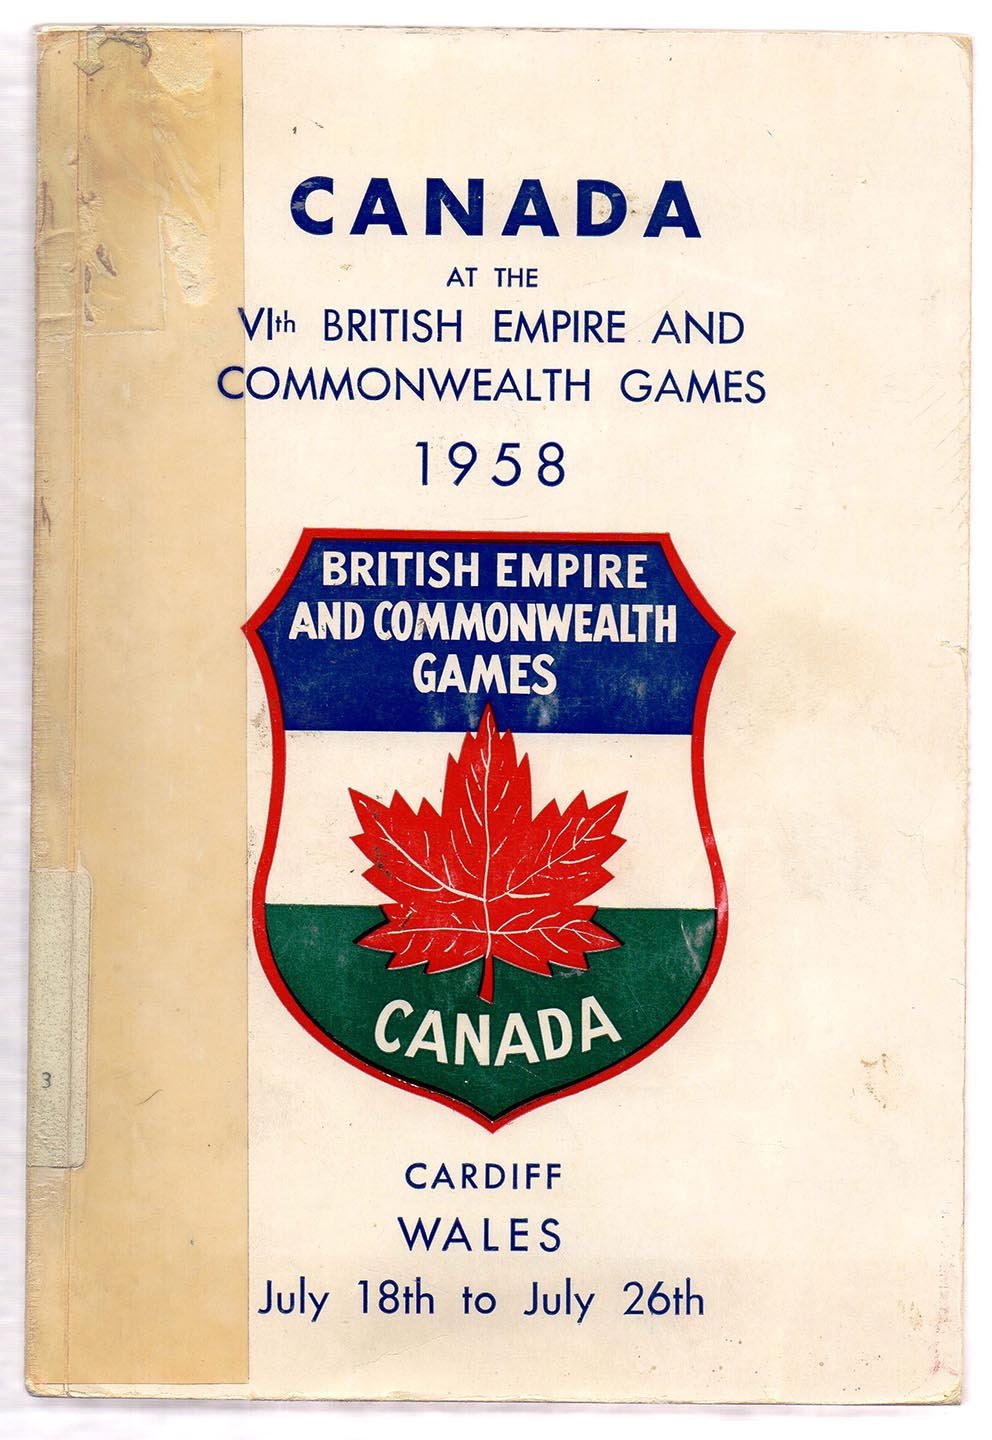 Canada's Part in the 1958 British Empire and Commonwealth Games, Cardiff Glamorgan, Wales, July 18th to July 26th